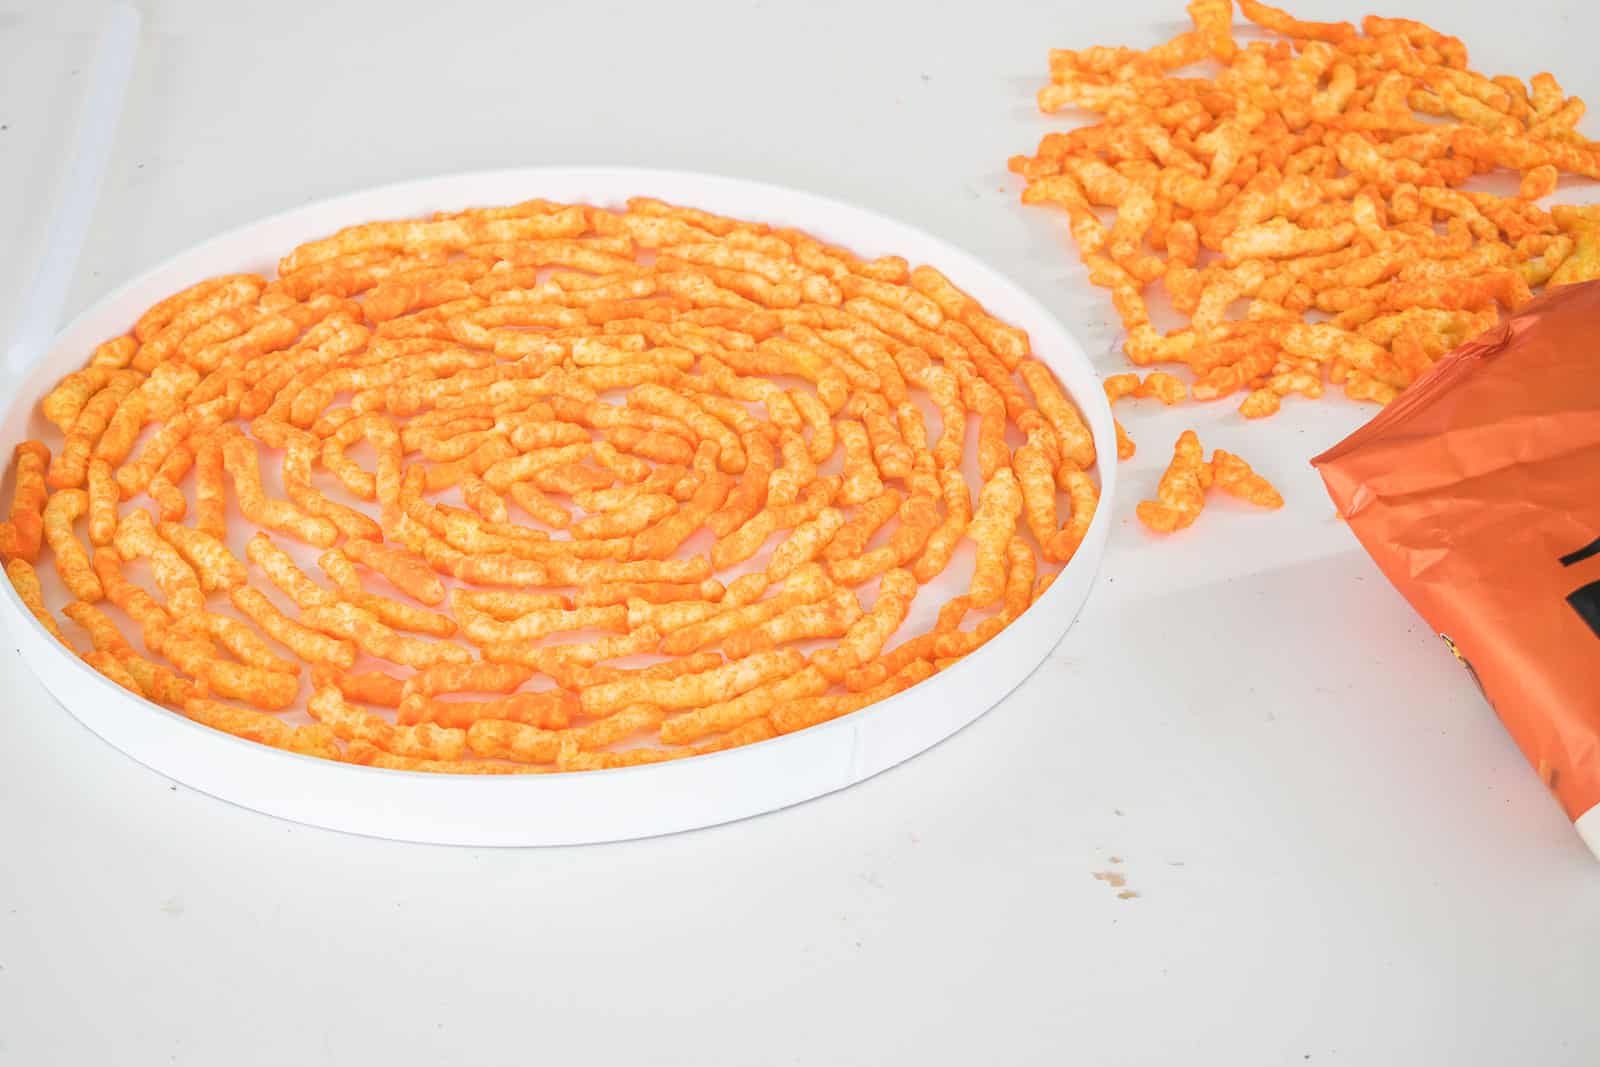 lay out cheetos on the tray